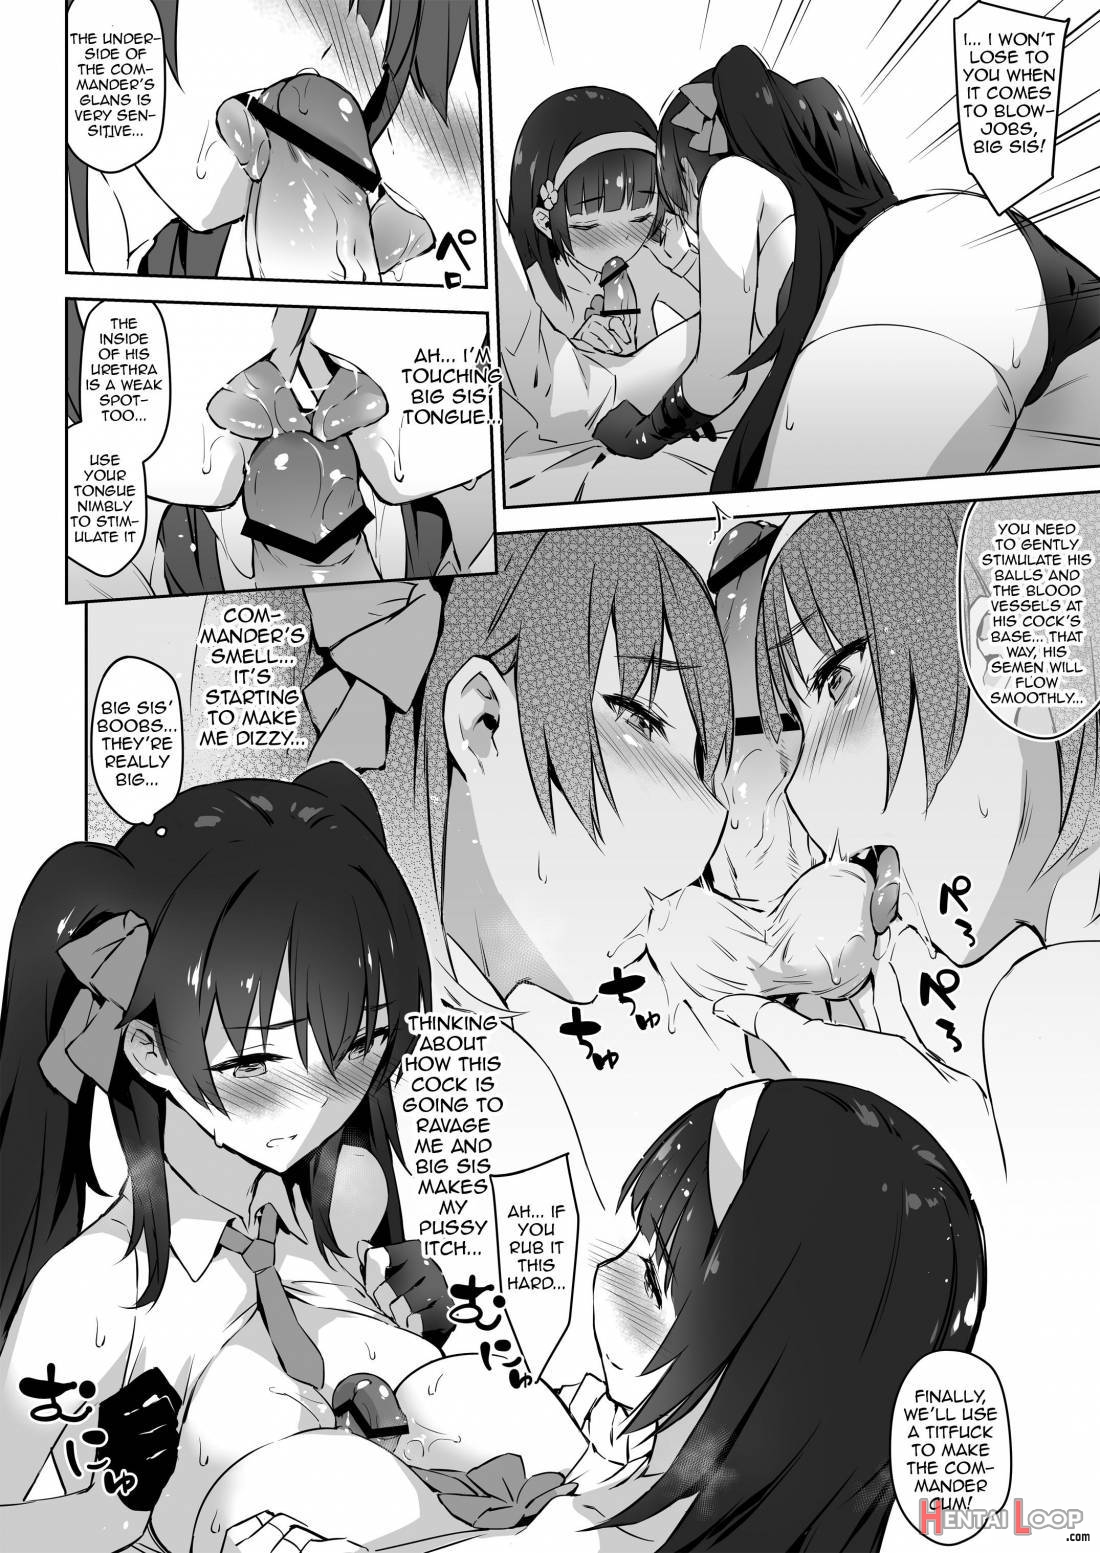 Type 95 Type 97, Let Your Big Sister Teach You! page 11